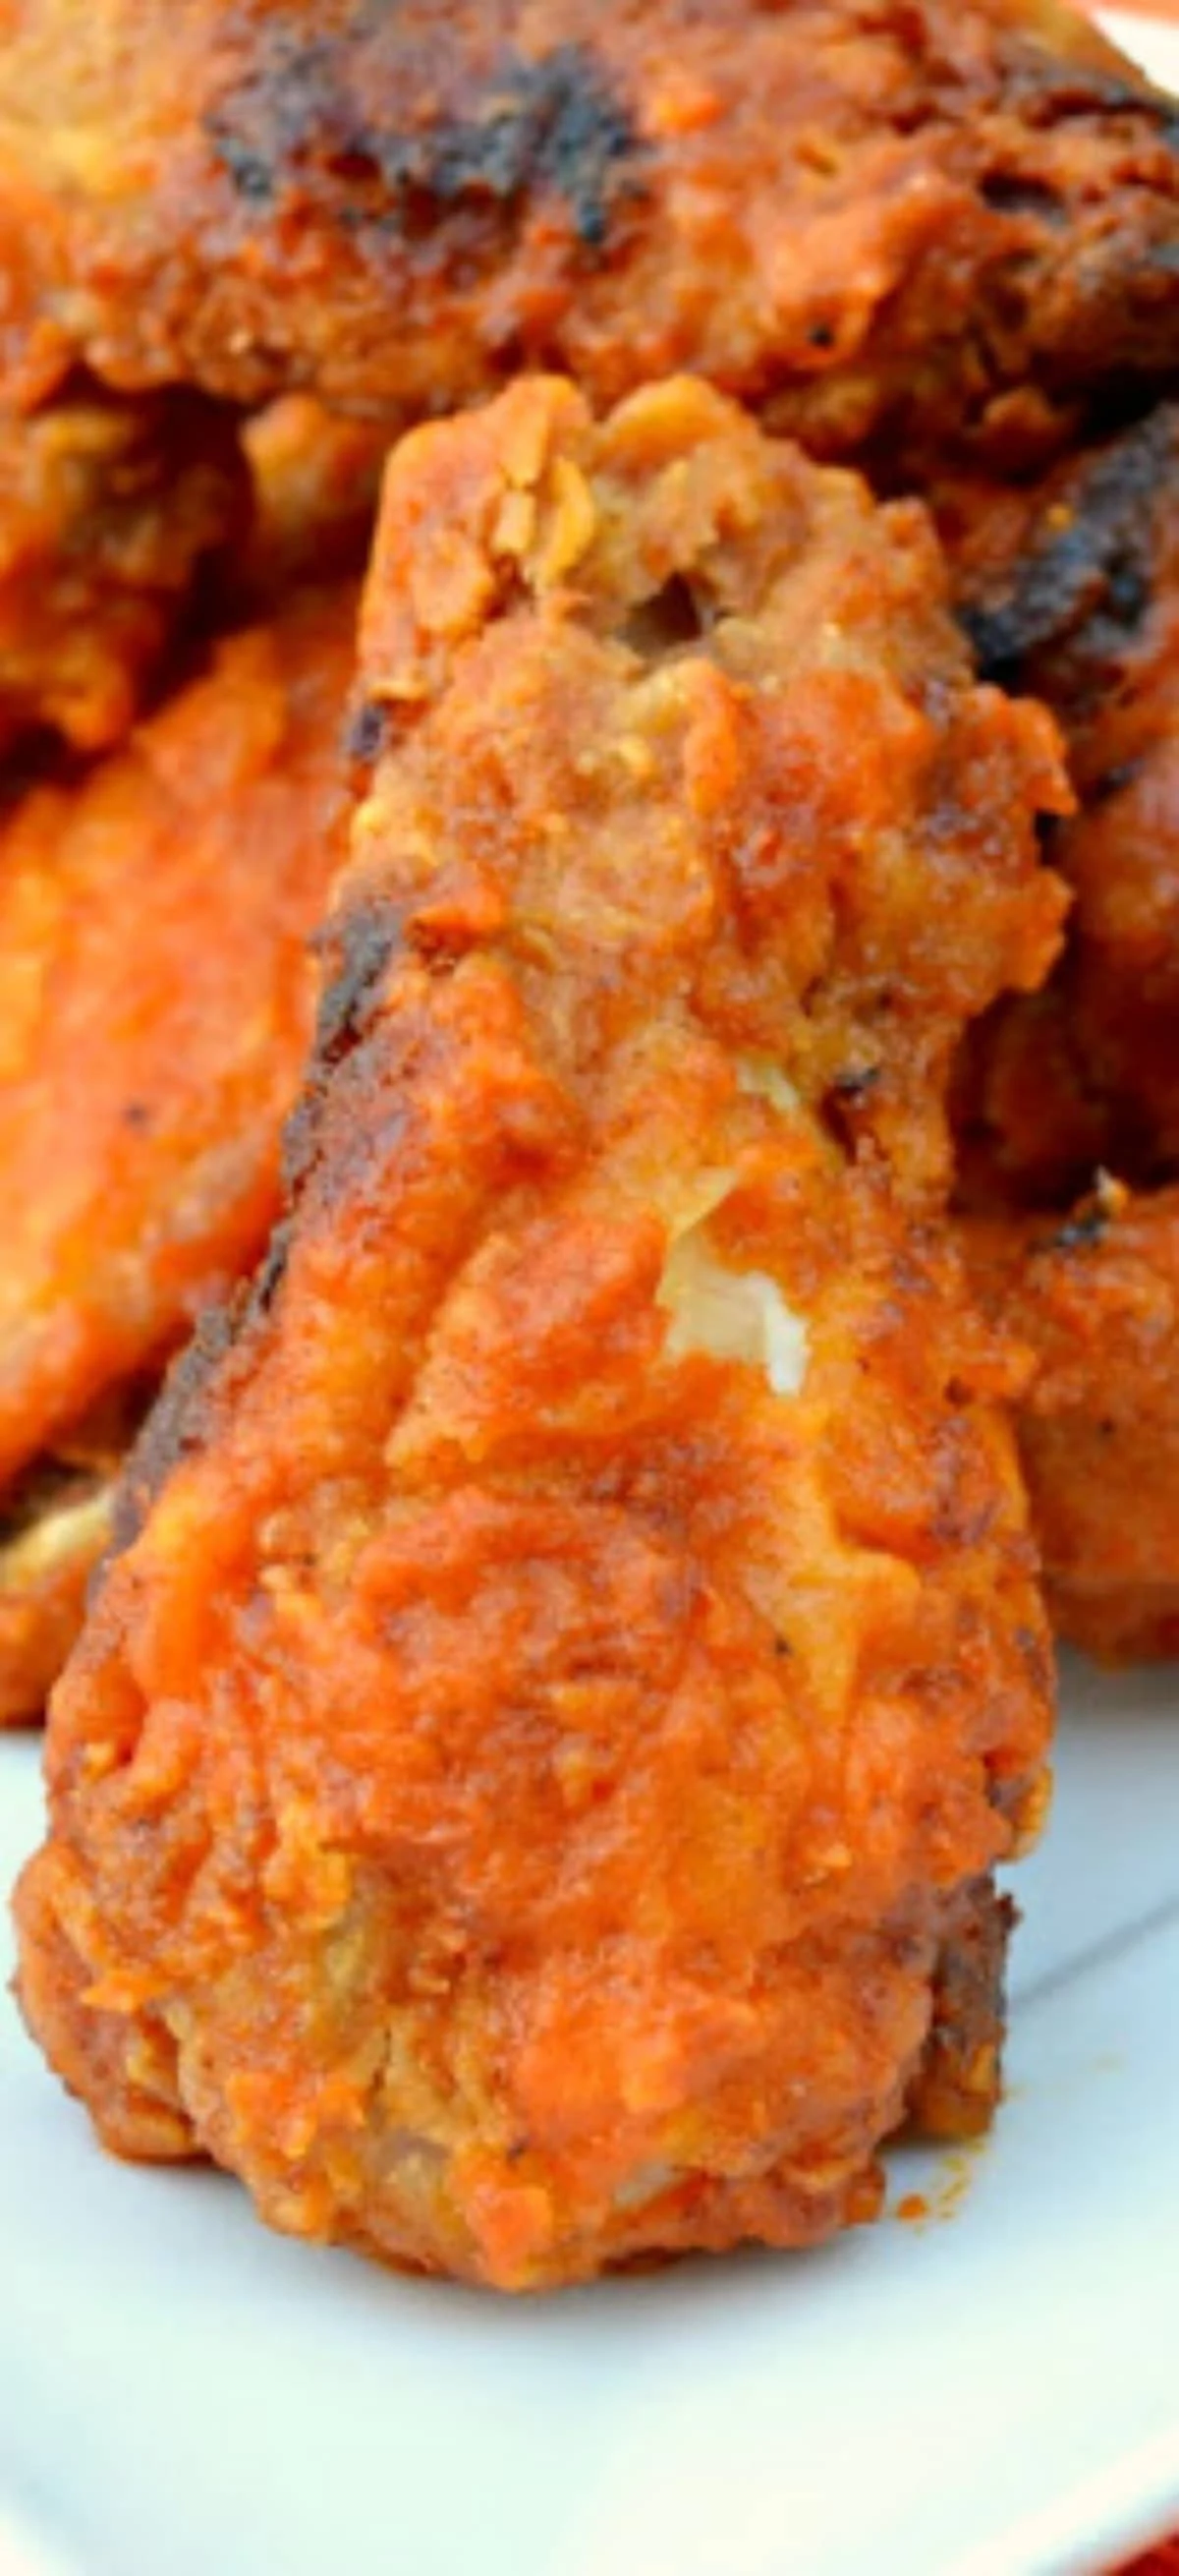 A close up of a Fried Hot Wings on white plate.